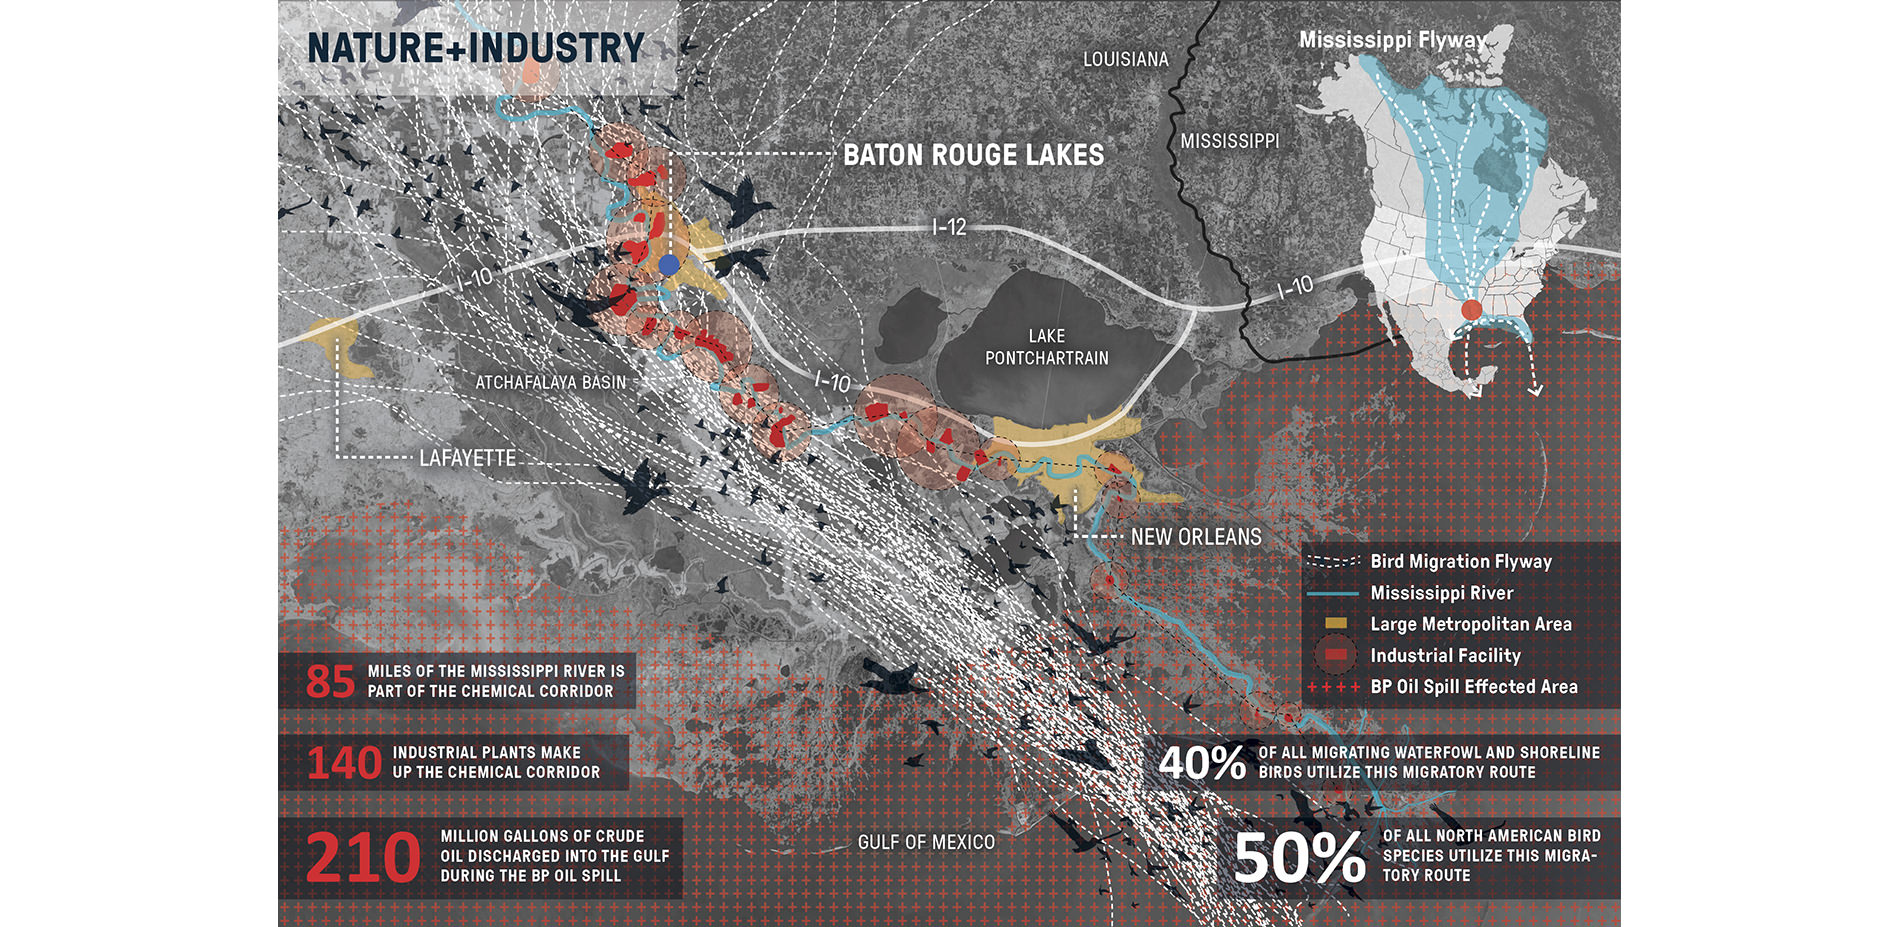 Map of Nature and Industry Interactions at Baton Rouge Lakes